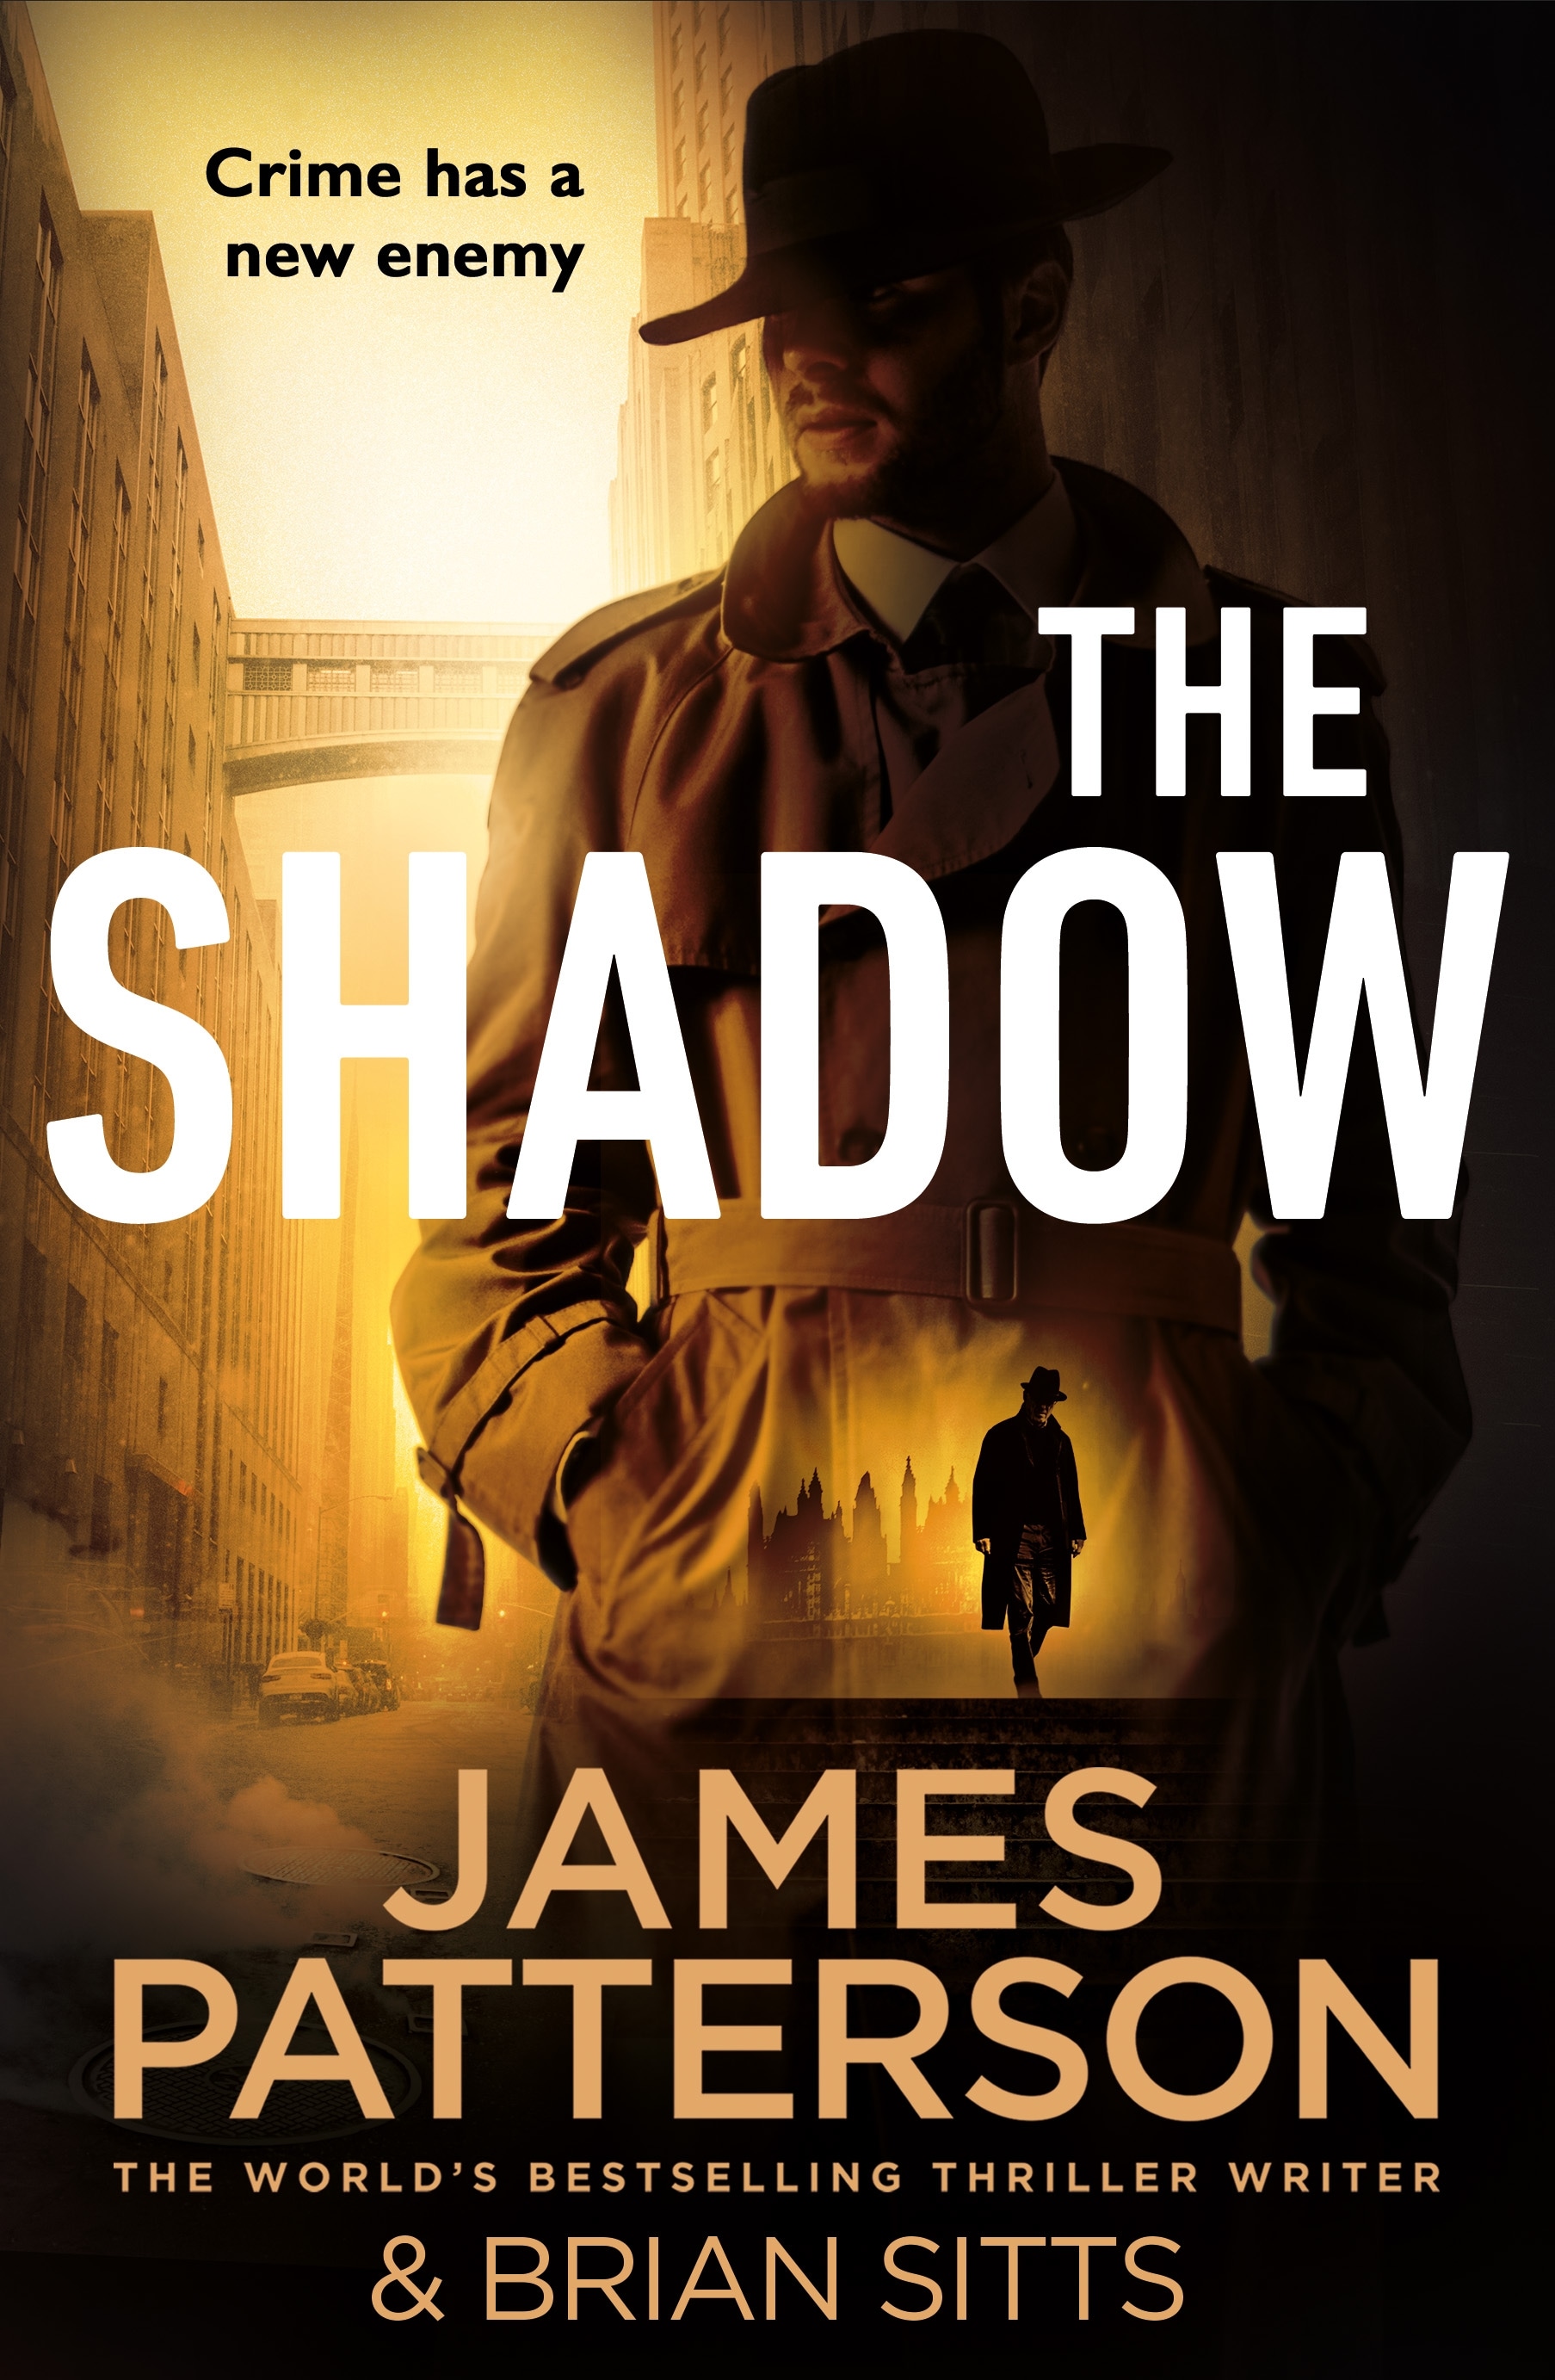 Book “The Shadow” by James Patterson